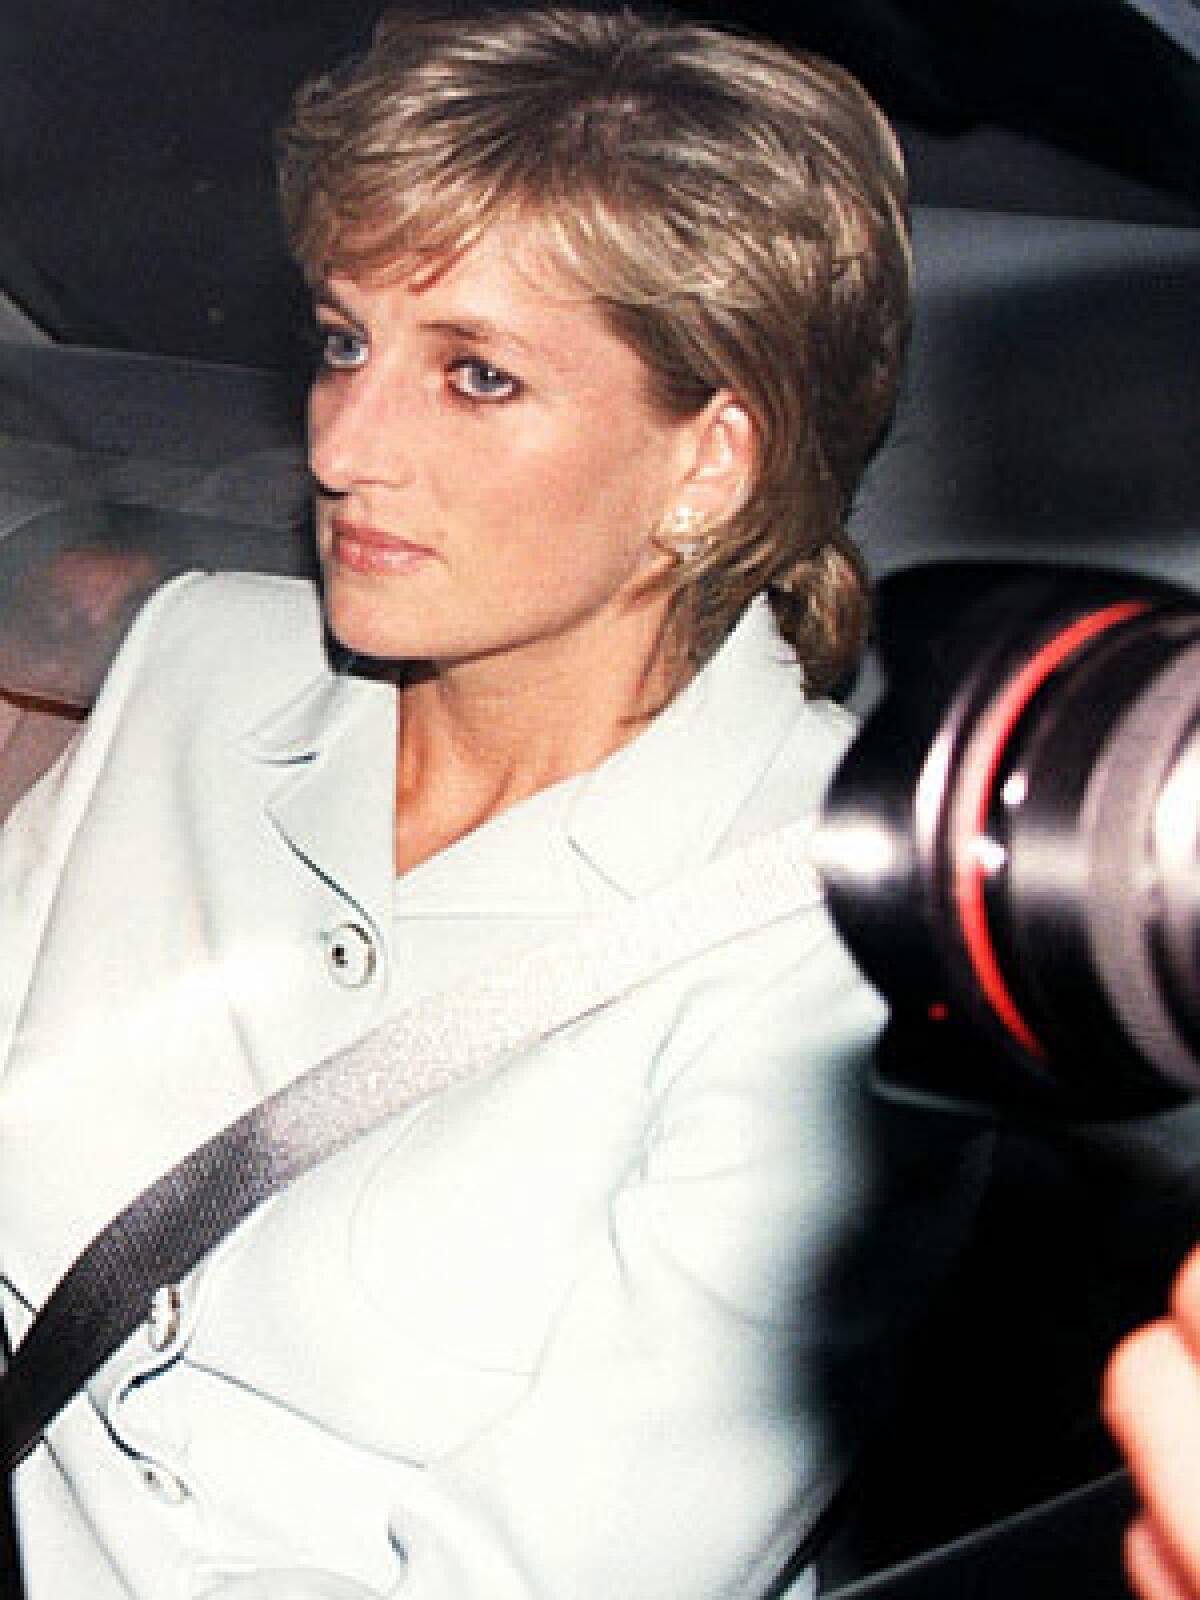 Diana, Princess of Wales, pictured in July 1996, leaving Kensington Palace in London.